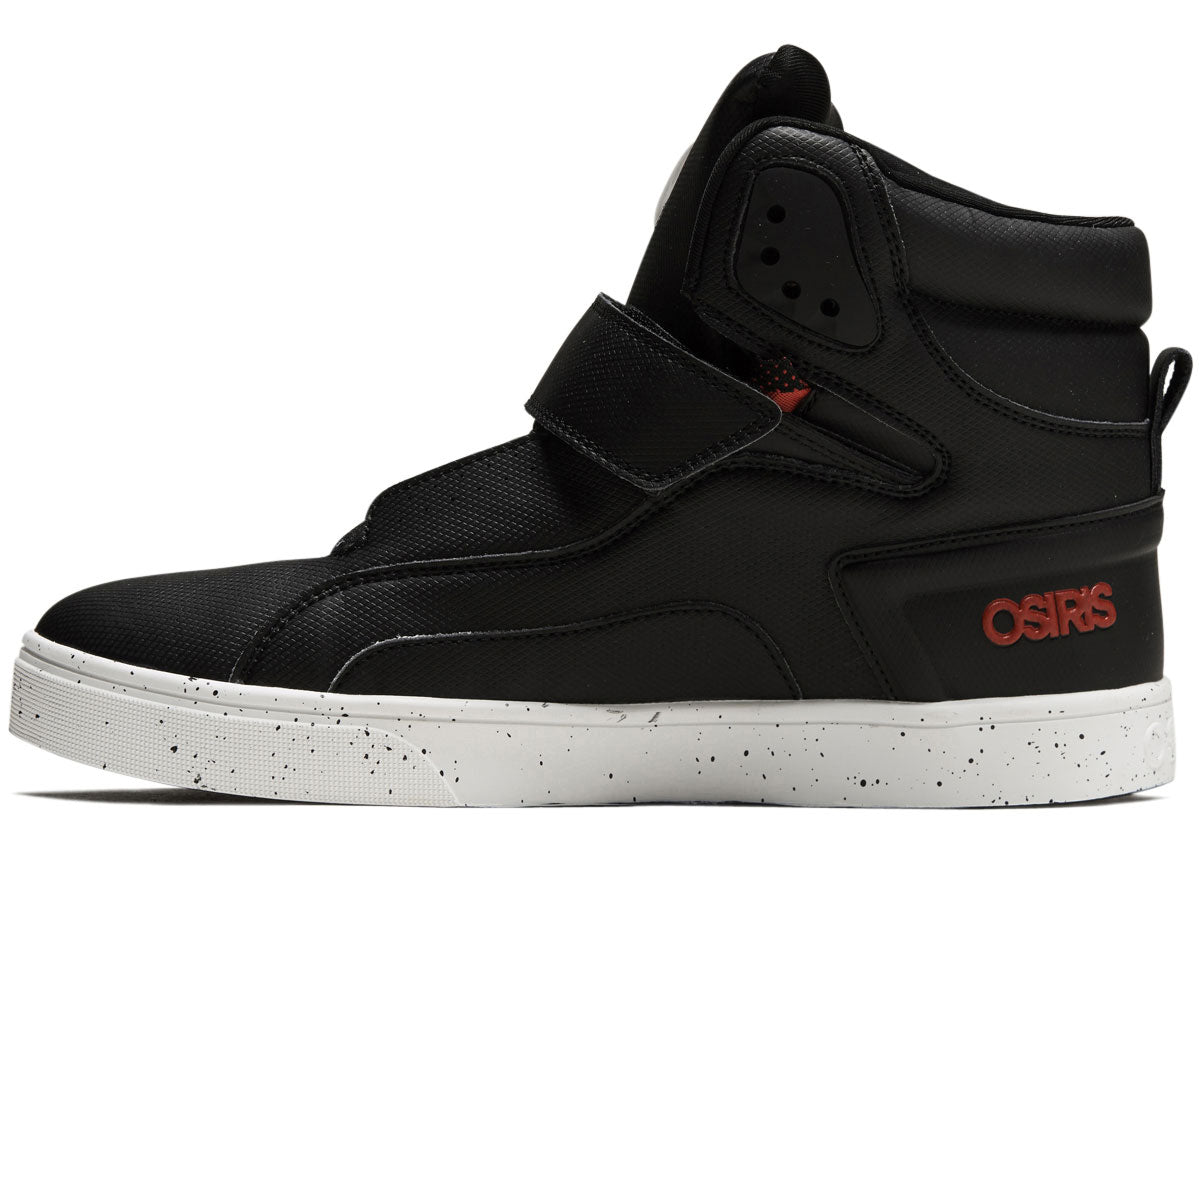 Osiris Rize Ultra Shoes - Black/Red/Spec image 2